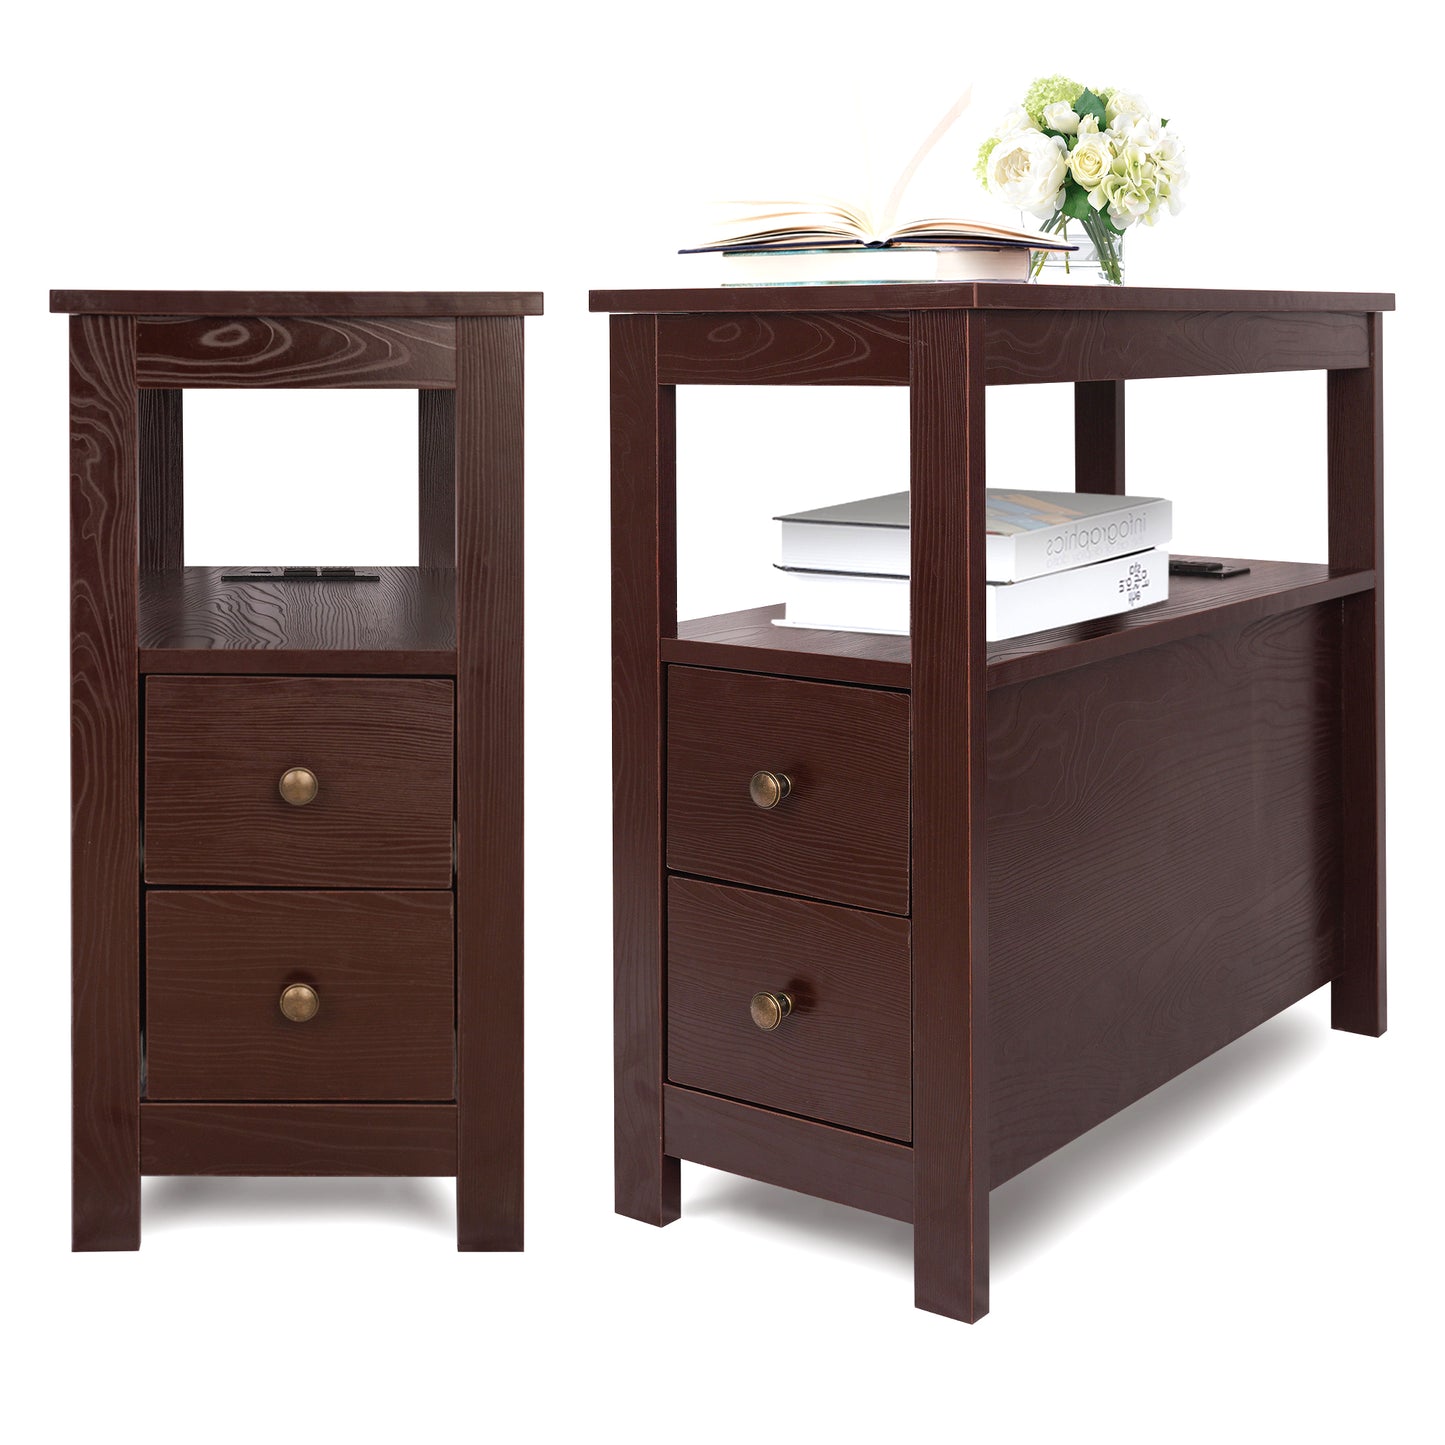 SYNGAR Side Table for Living Room, Nightstand Set of 2, Modern Side Cabinet W/ 2 Drawers, Open Shelf, Power Outlets & USB Ports, Wood End Table with Storage, Bedside Table for Bedroom, Espresso, D4684